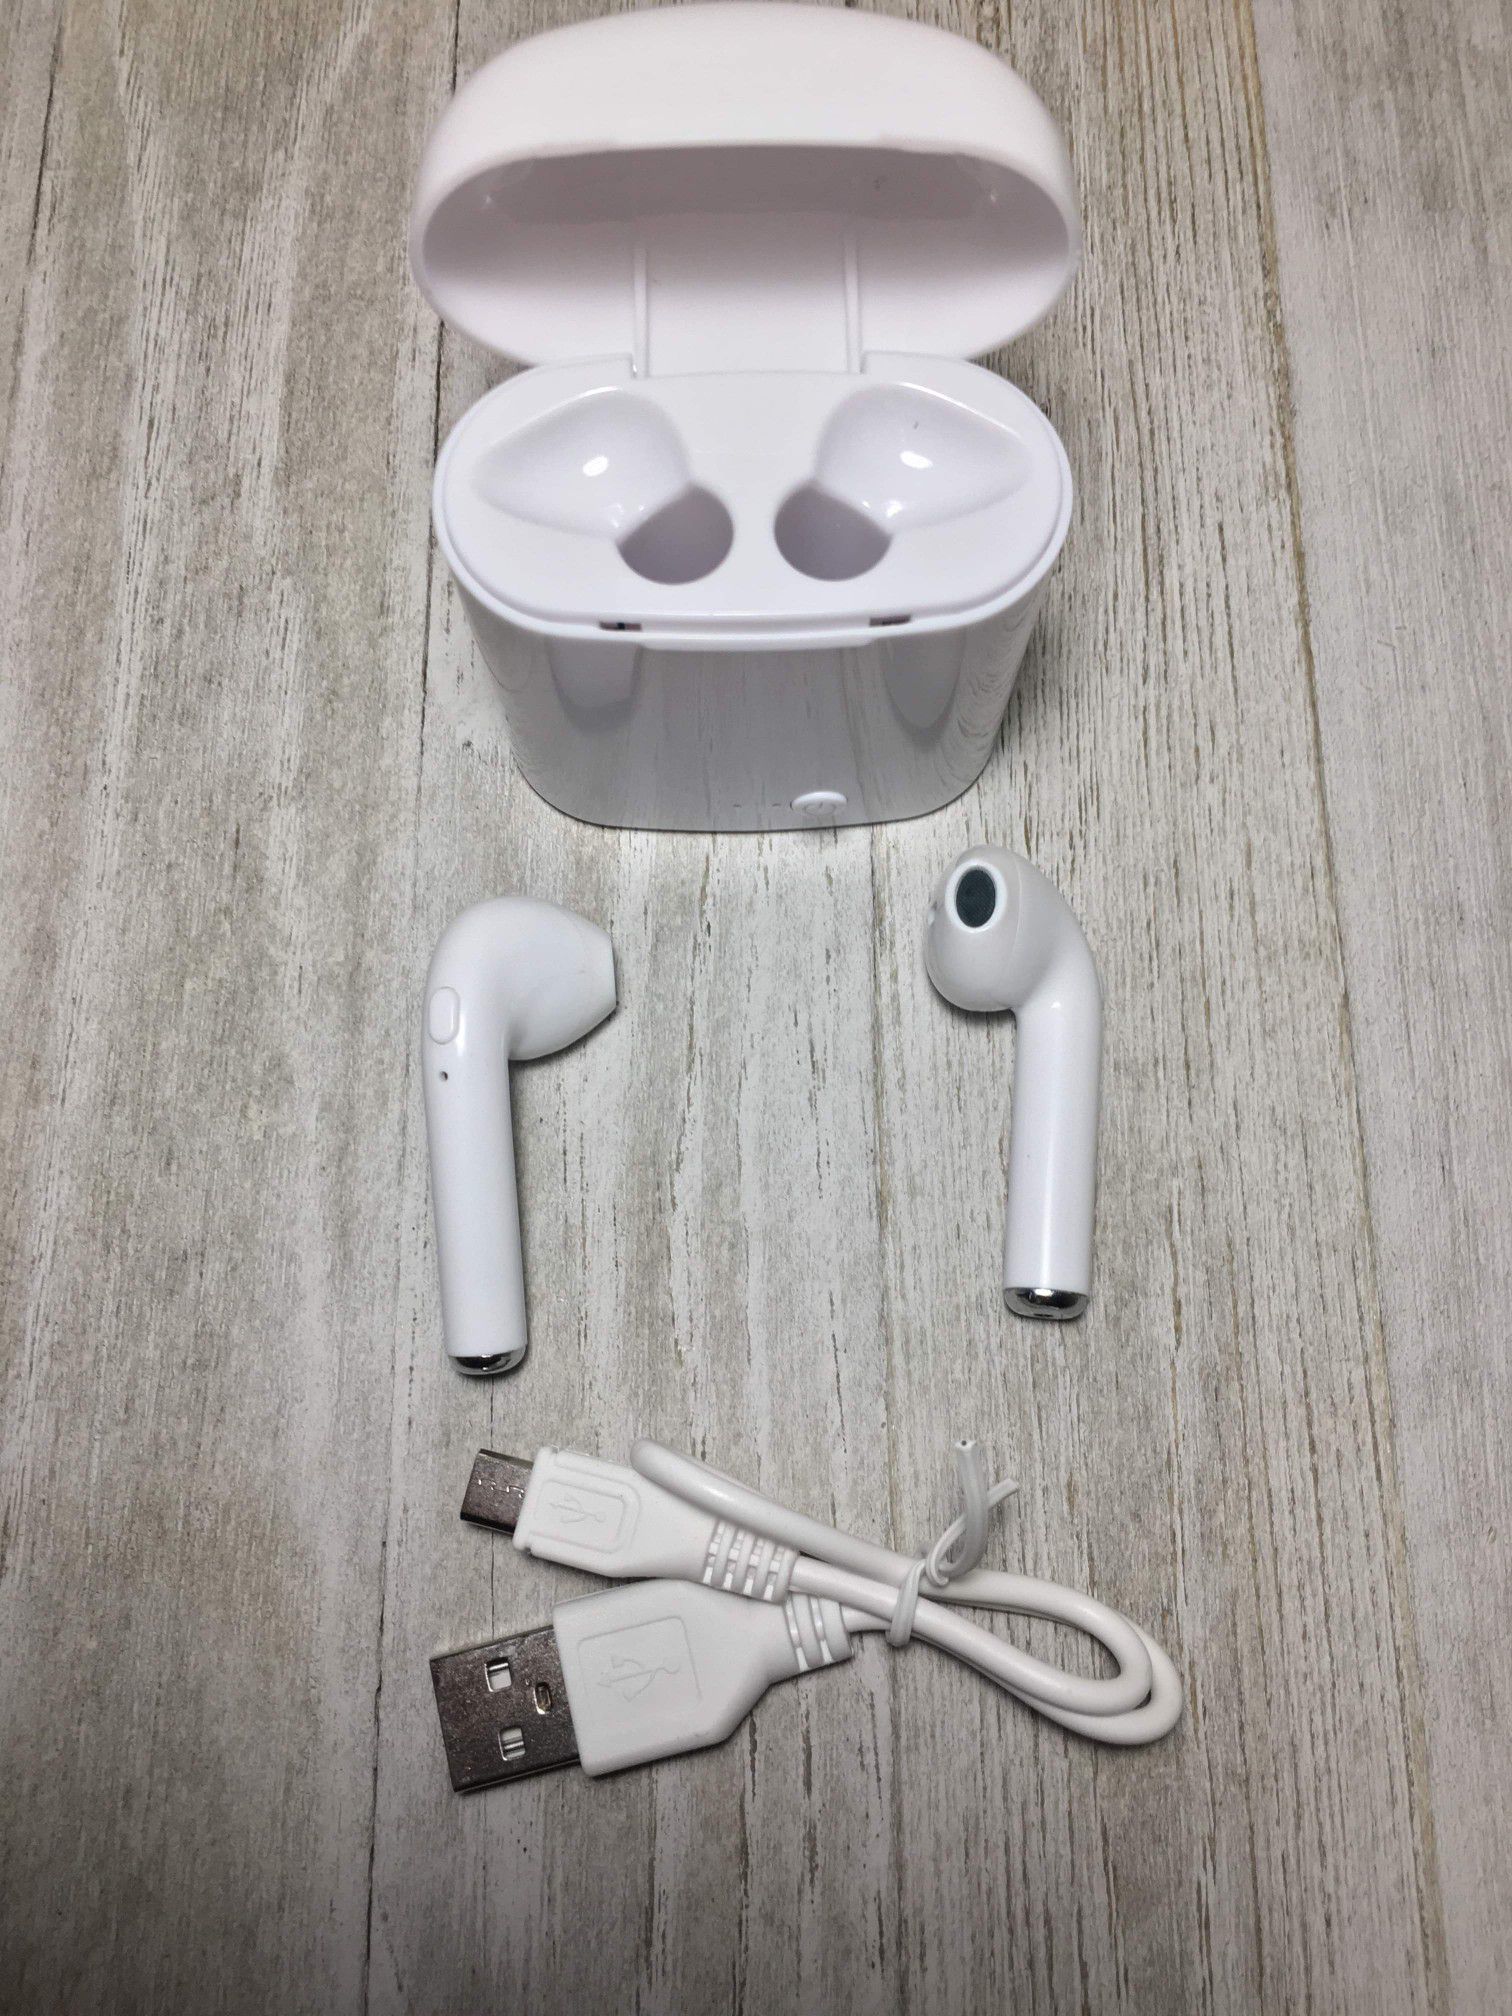 Brand New Bluetooth Wireless Earbuds Headphones Similar To AirPods Compatible with Iphone Smasung Ios Android Great